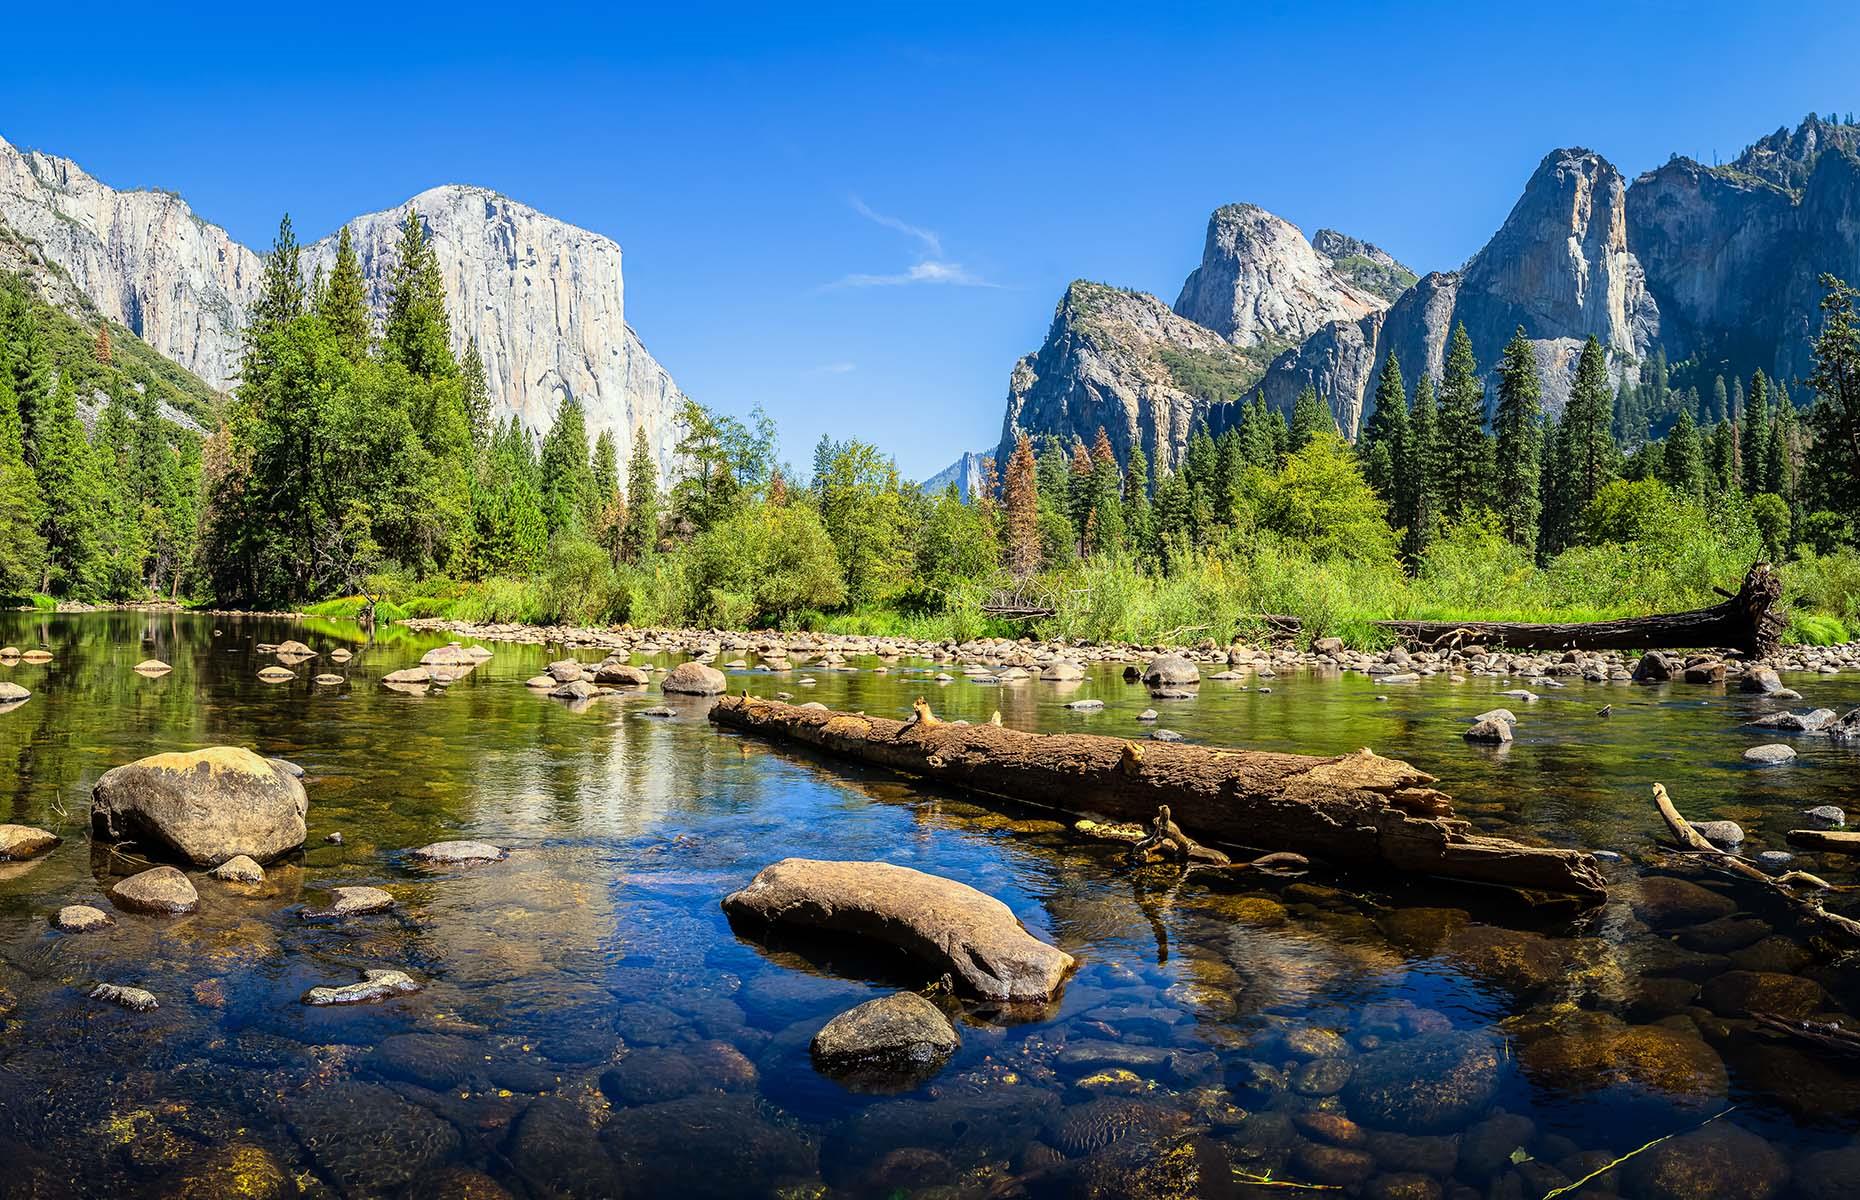 <p>Famed for its awe-inspiring vistas, cliffs and lush forests, Yosemite National Park is full of big-hitter attractions, but there's nothing quite like Yosemite Valley. Seen here from the Tunnel View viewpoint, you can really appreciate the jaw-dropping landscape in all its splendour.</p>  <p><a href="https://www.loveexploring.com/galleries/107668/historic-photos-of-americas-national-parks?page=1"><strong>Take a look at historic photos of America's national parks</strong></a></p>